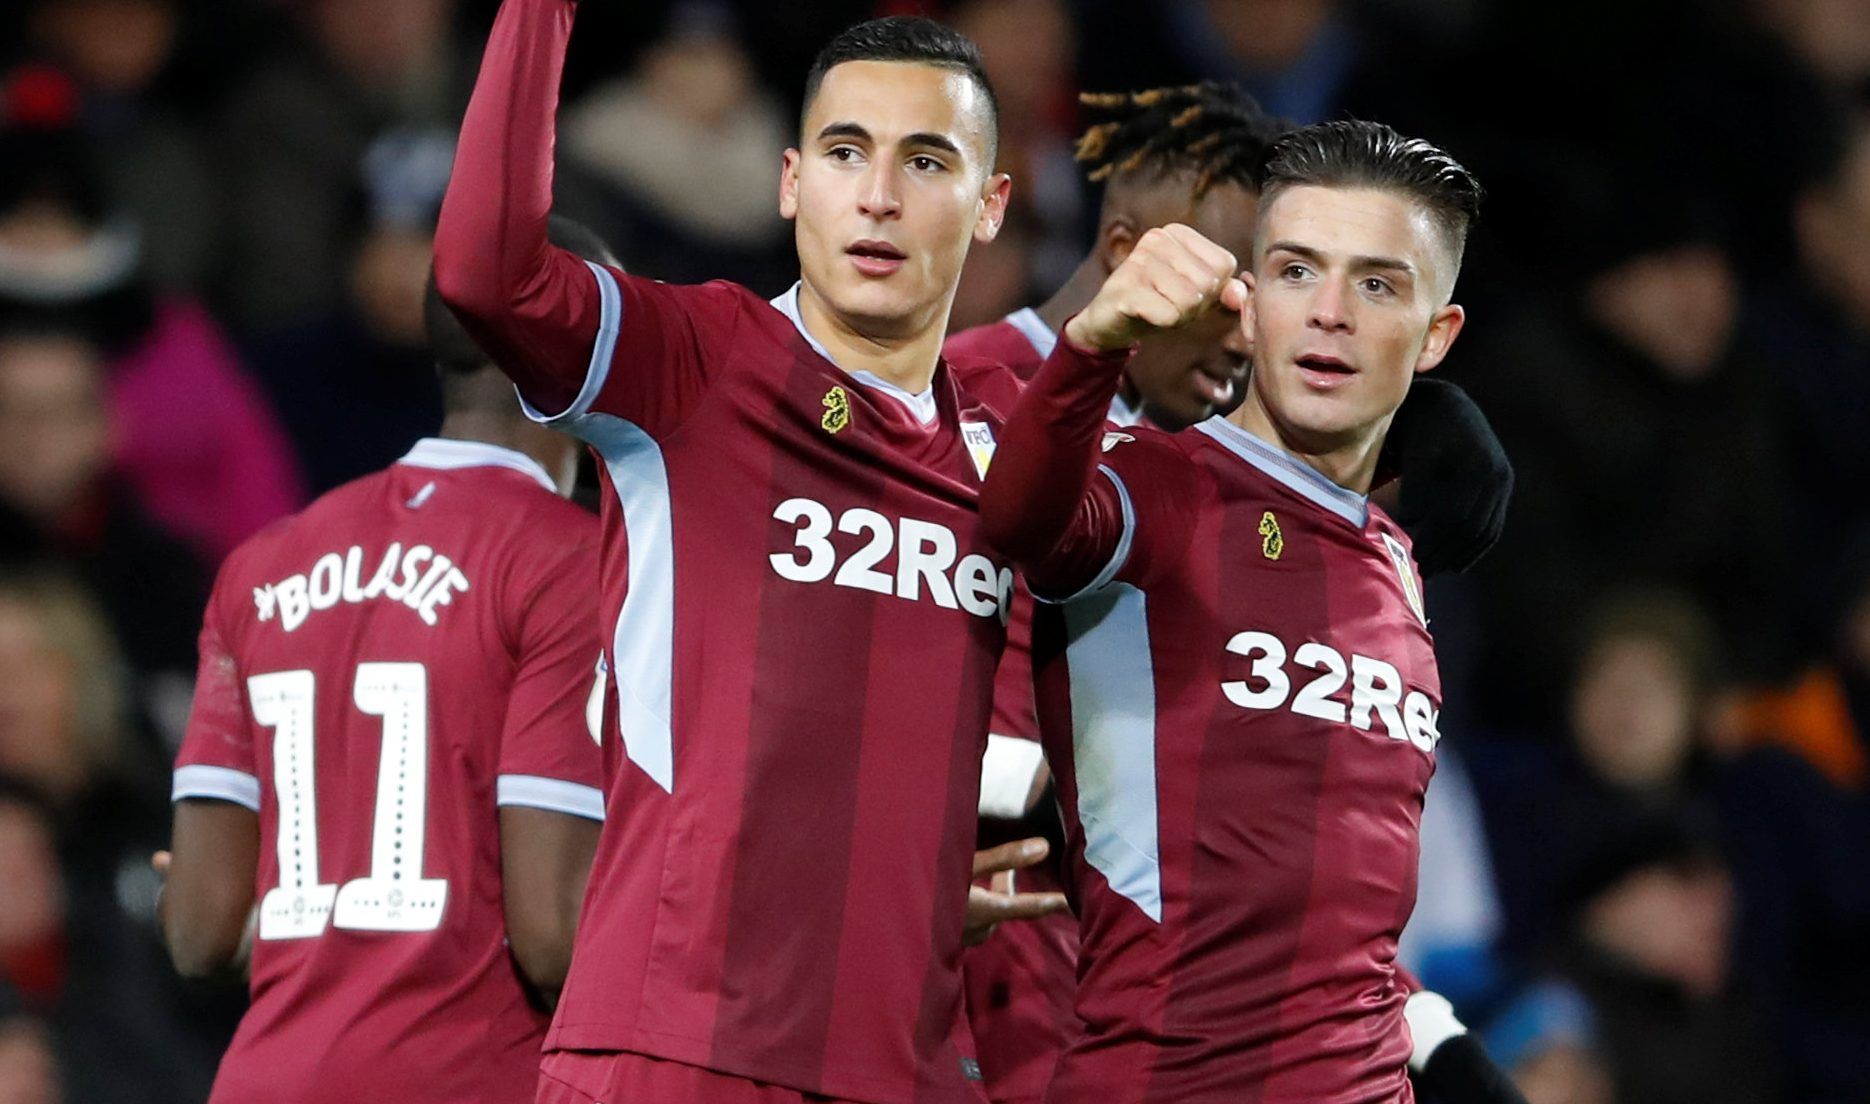 Soccer Football - Championship - West Bromwich Albion v Aston Villa - The Hawthorns, West Bromwich, Britain - December 7, 2018   Aston Villa's Anwar El-Ghazi celebrates scoring their second goal with team mates    Action Images/Carl Recine    EDITORIAL USE ONLY. No use with unauthorized audio, video, data, fixture lists, club/league logos or 